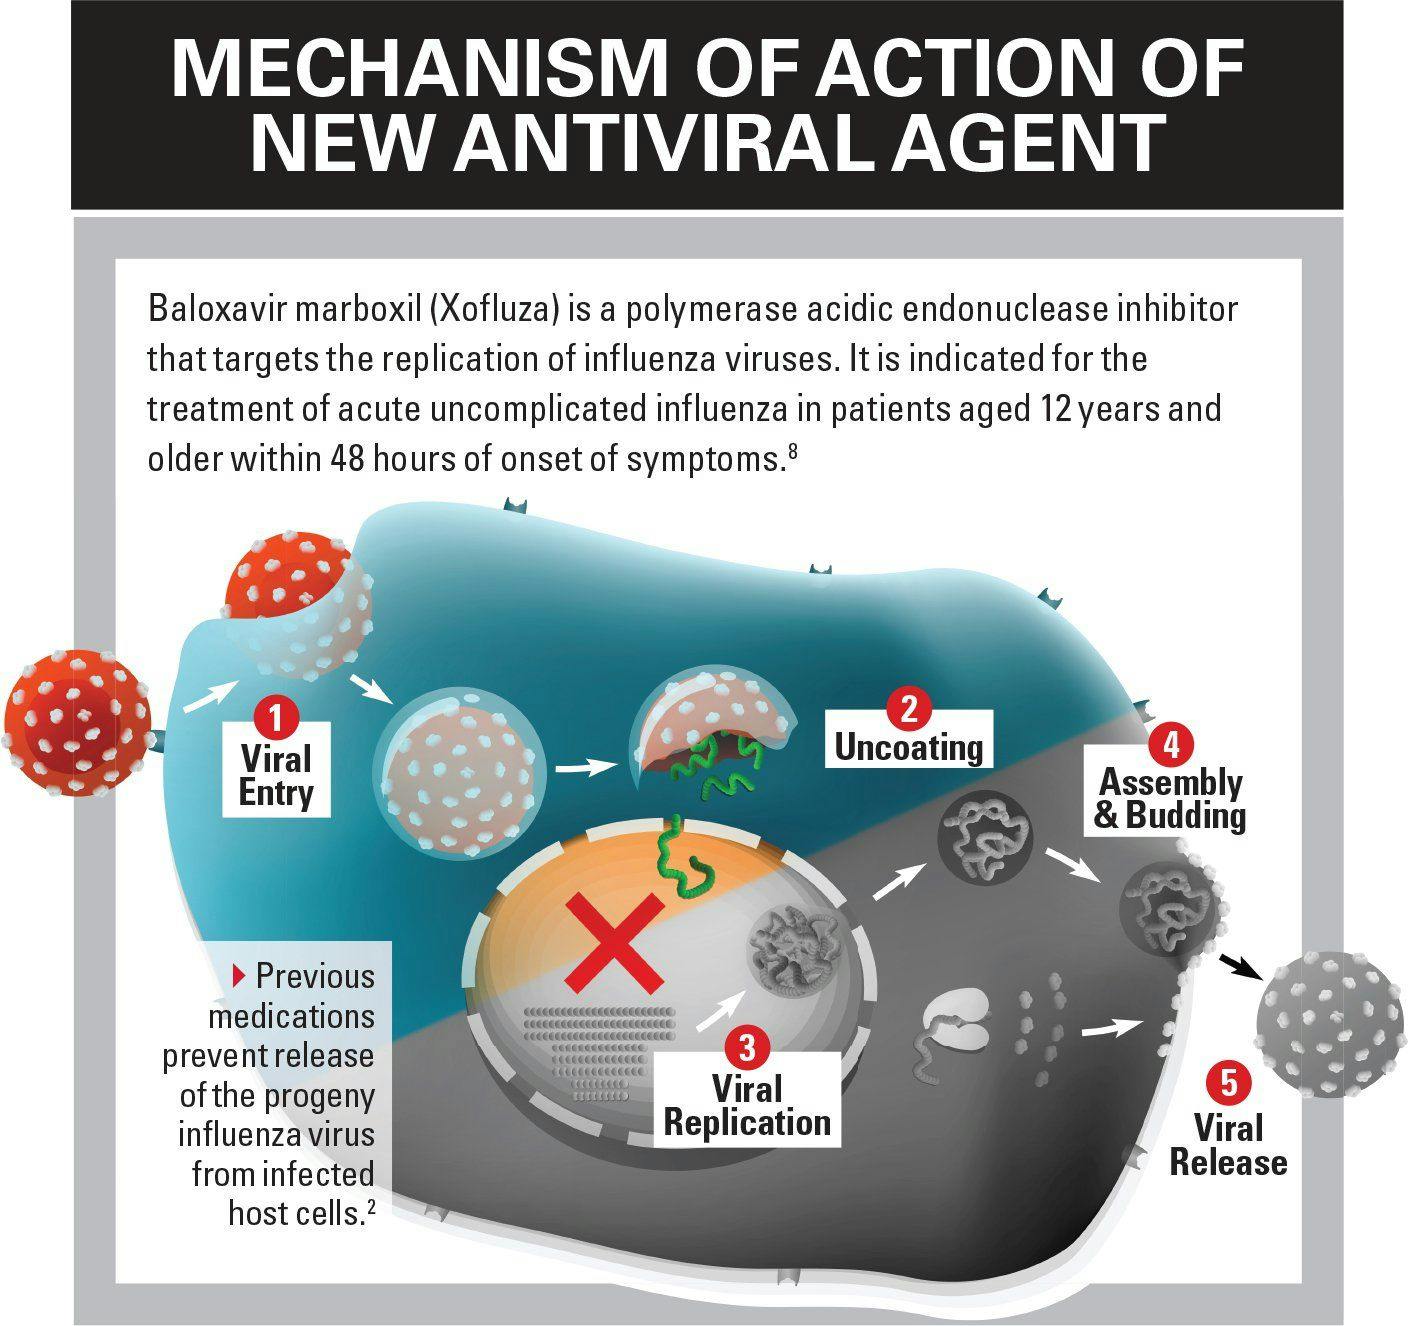 Mechanism of action of new antiviral agent